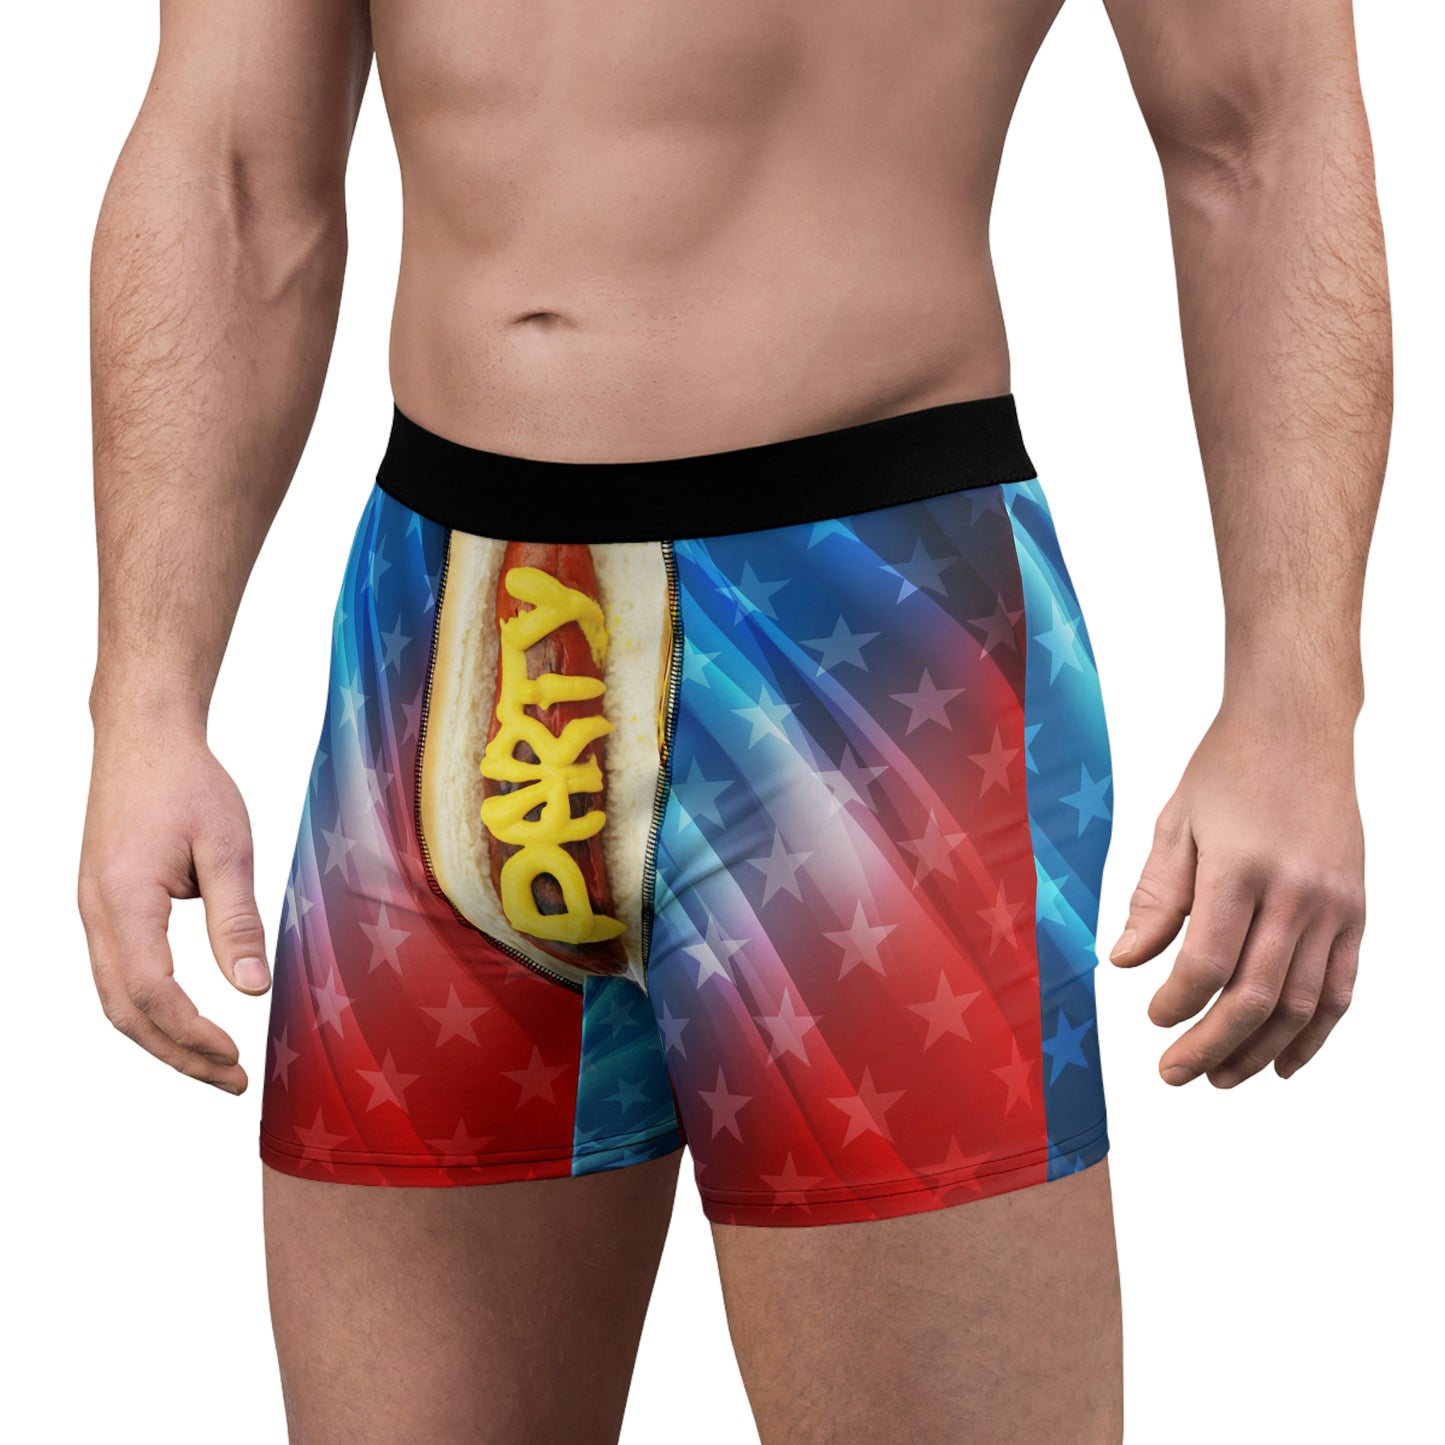 Party in the USA Men's Boxer Briefs